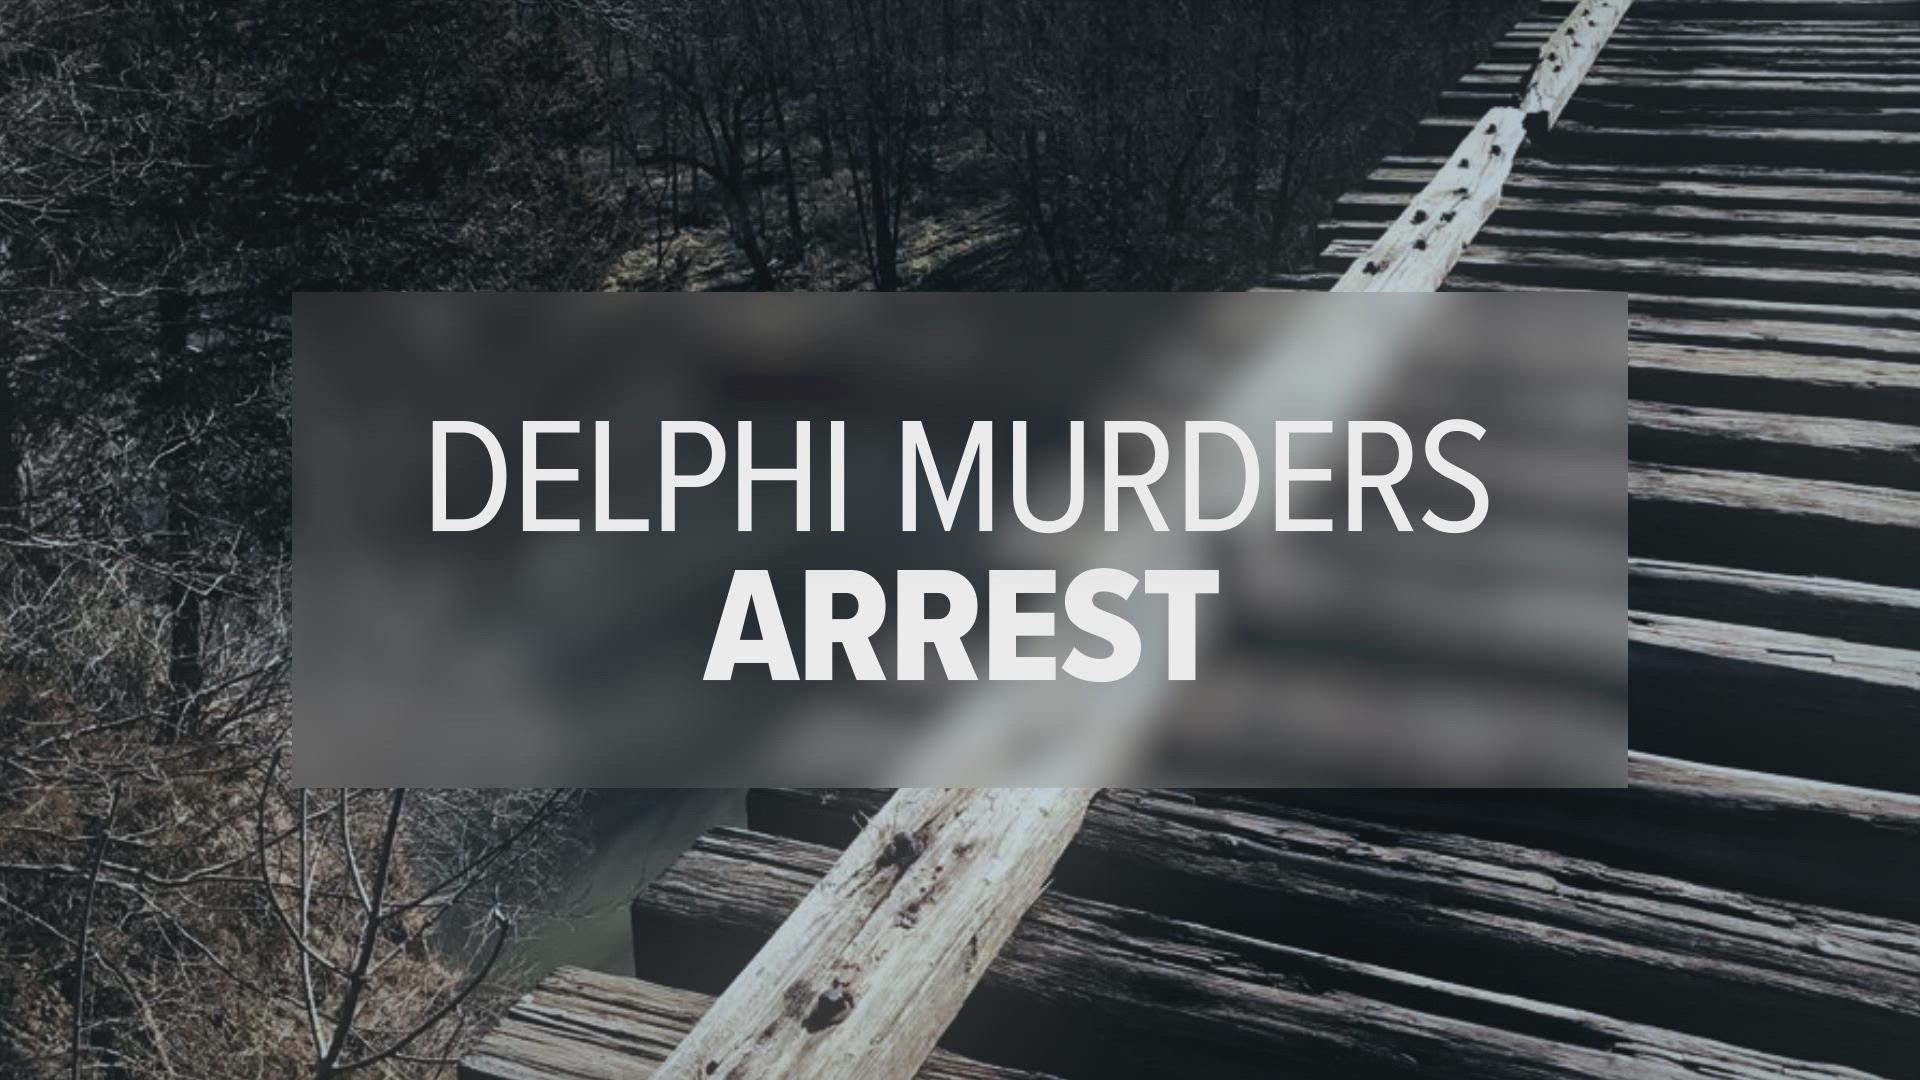 After six years, a Delphi man has been arrested and charged in the murders of two girls killed in 2017. More on who he is, and the timeline of their tragic deaths.